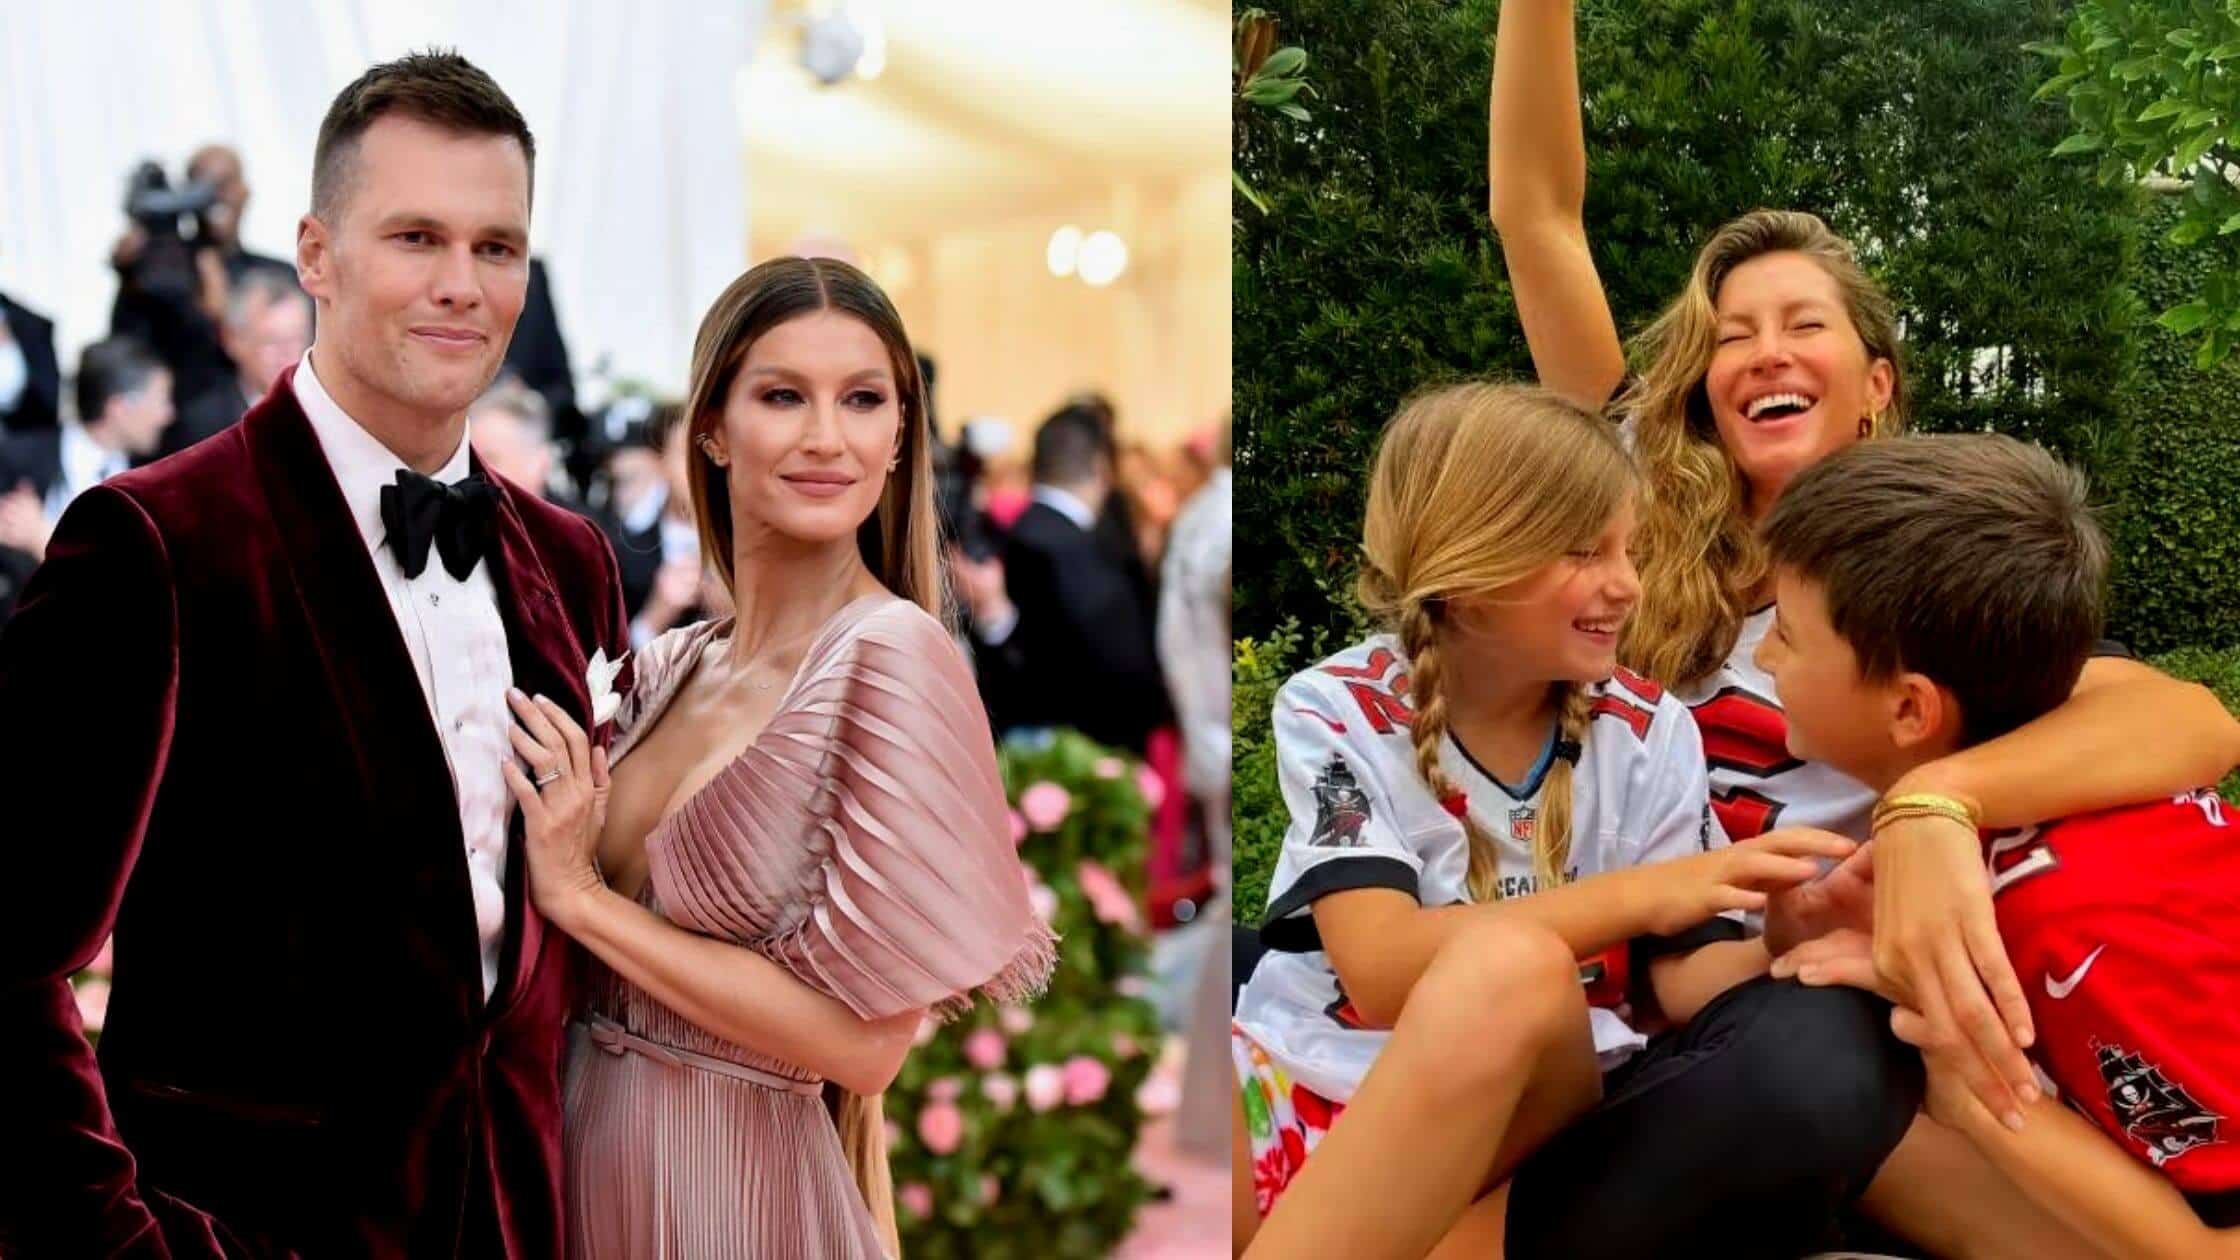 Gisele Bündchen And Her Daughter Were Spotted At Disney World In Florida